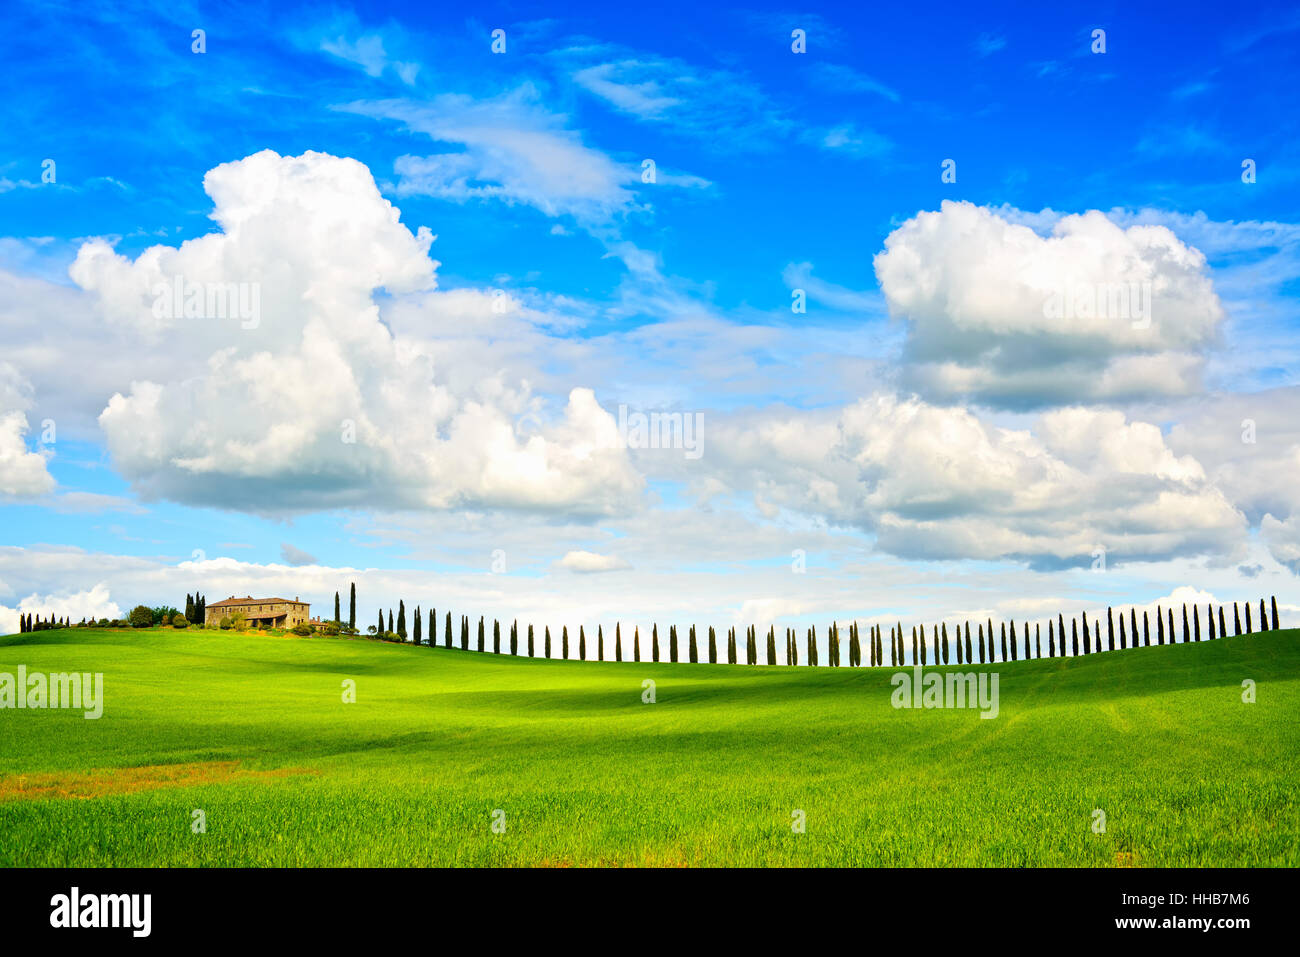 Tuscany, farmland, cypress trees row and plowed field, country landscape. Siena, Val d Orcia, Italy, Europe. Stock Photo